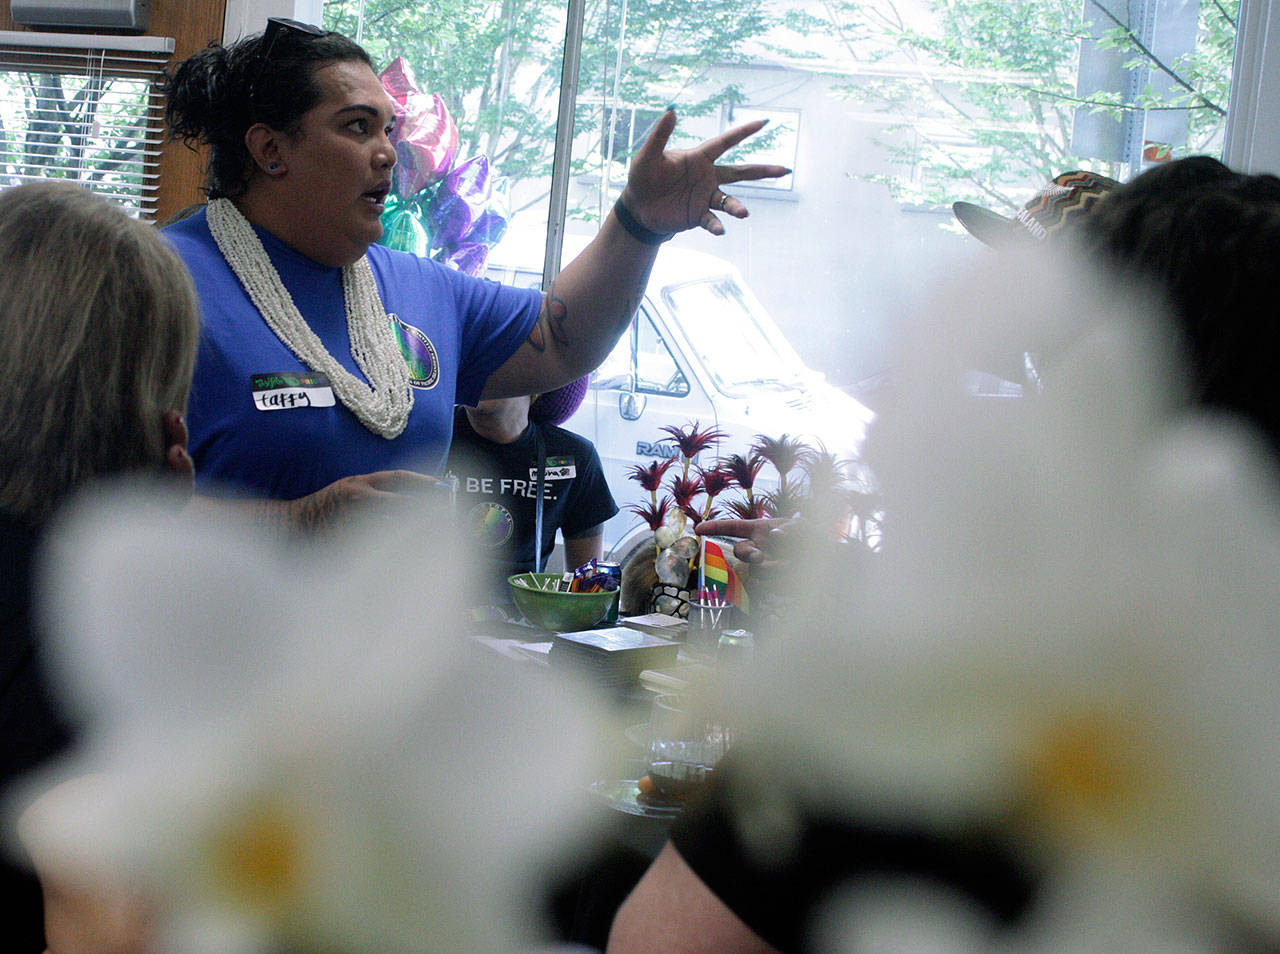 Taffy Johnson, founder and executive director of UTOPIA Seattle (United Territories of Pacific Islanders Alliance), entertains guest at the grand opening of the organization’s downtown Kent center last Saturday. MARK KLAAS, Kent Reporter